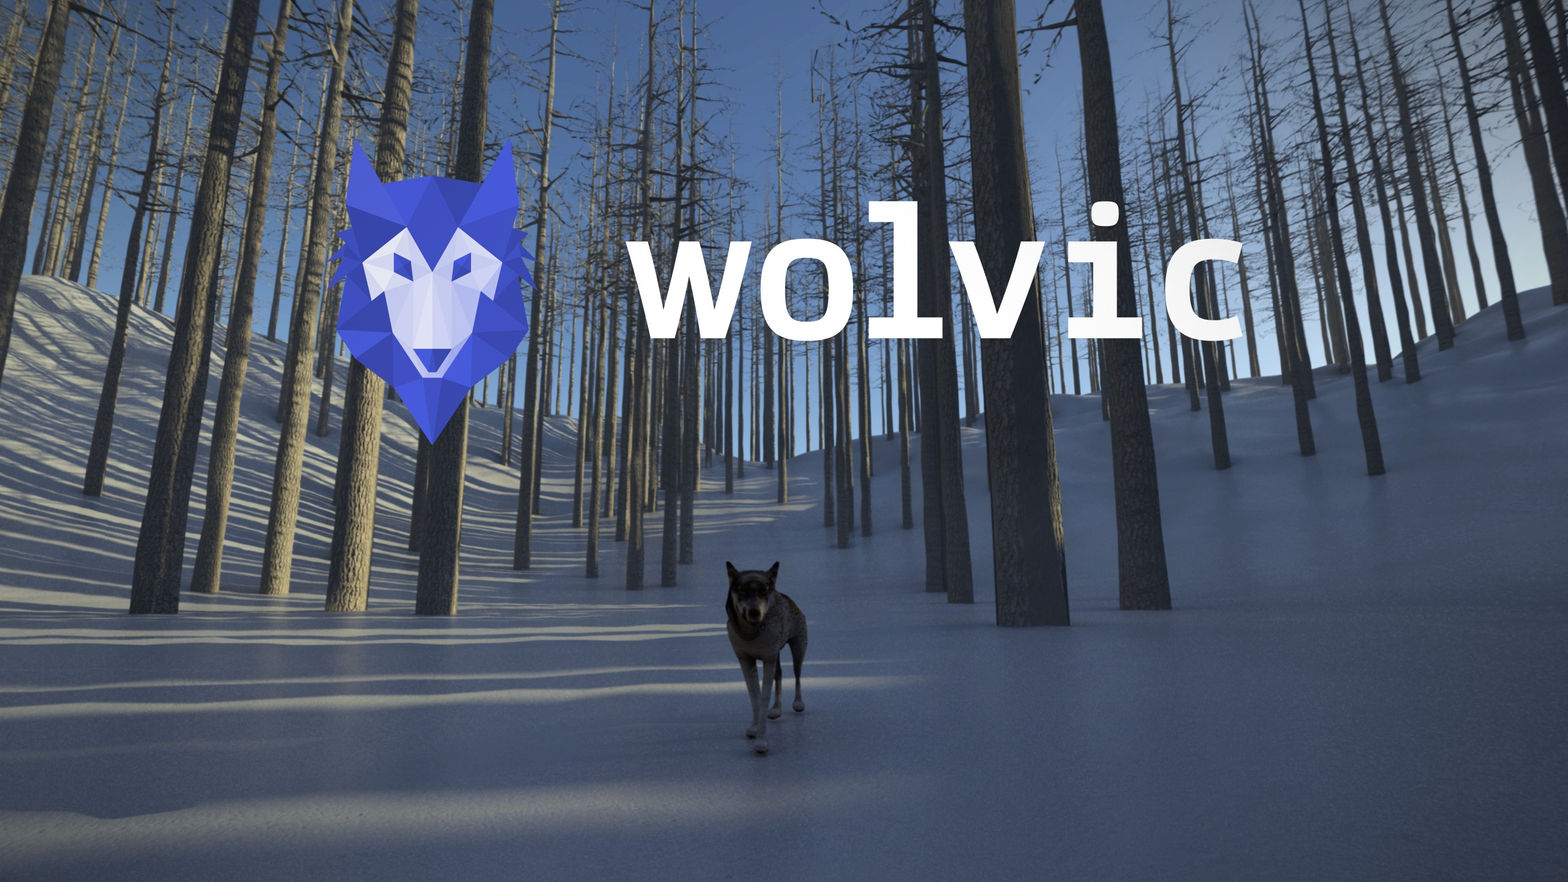 Wolvic (outdated App Lab version)